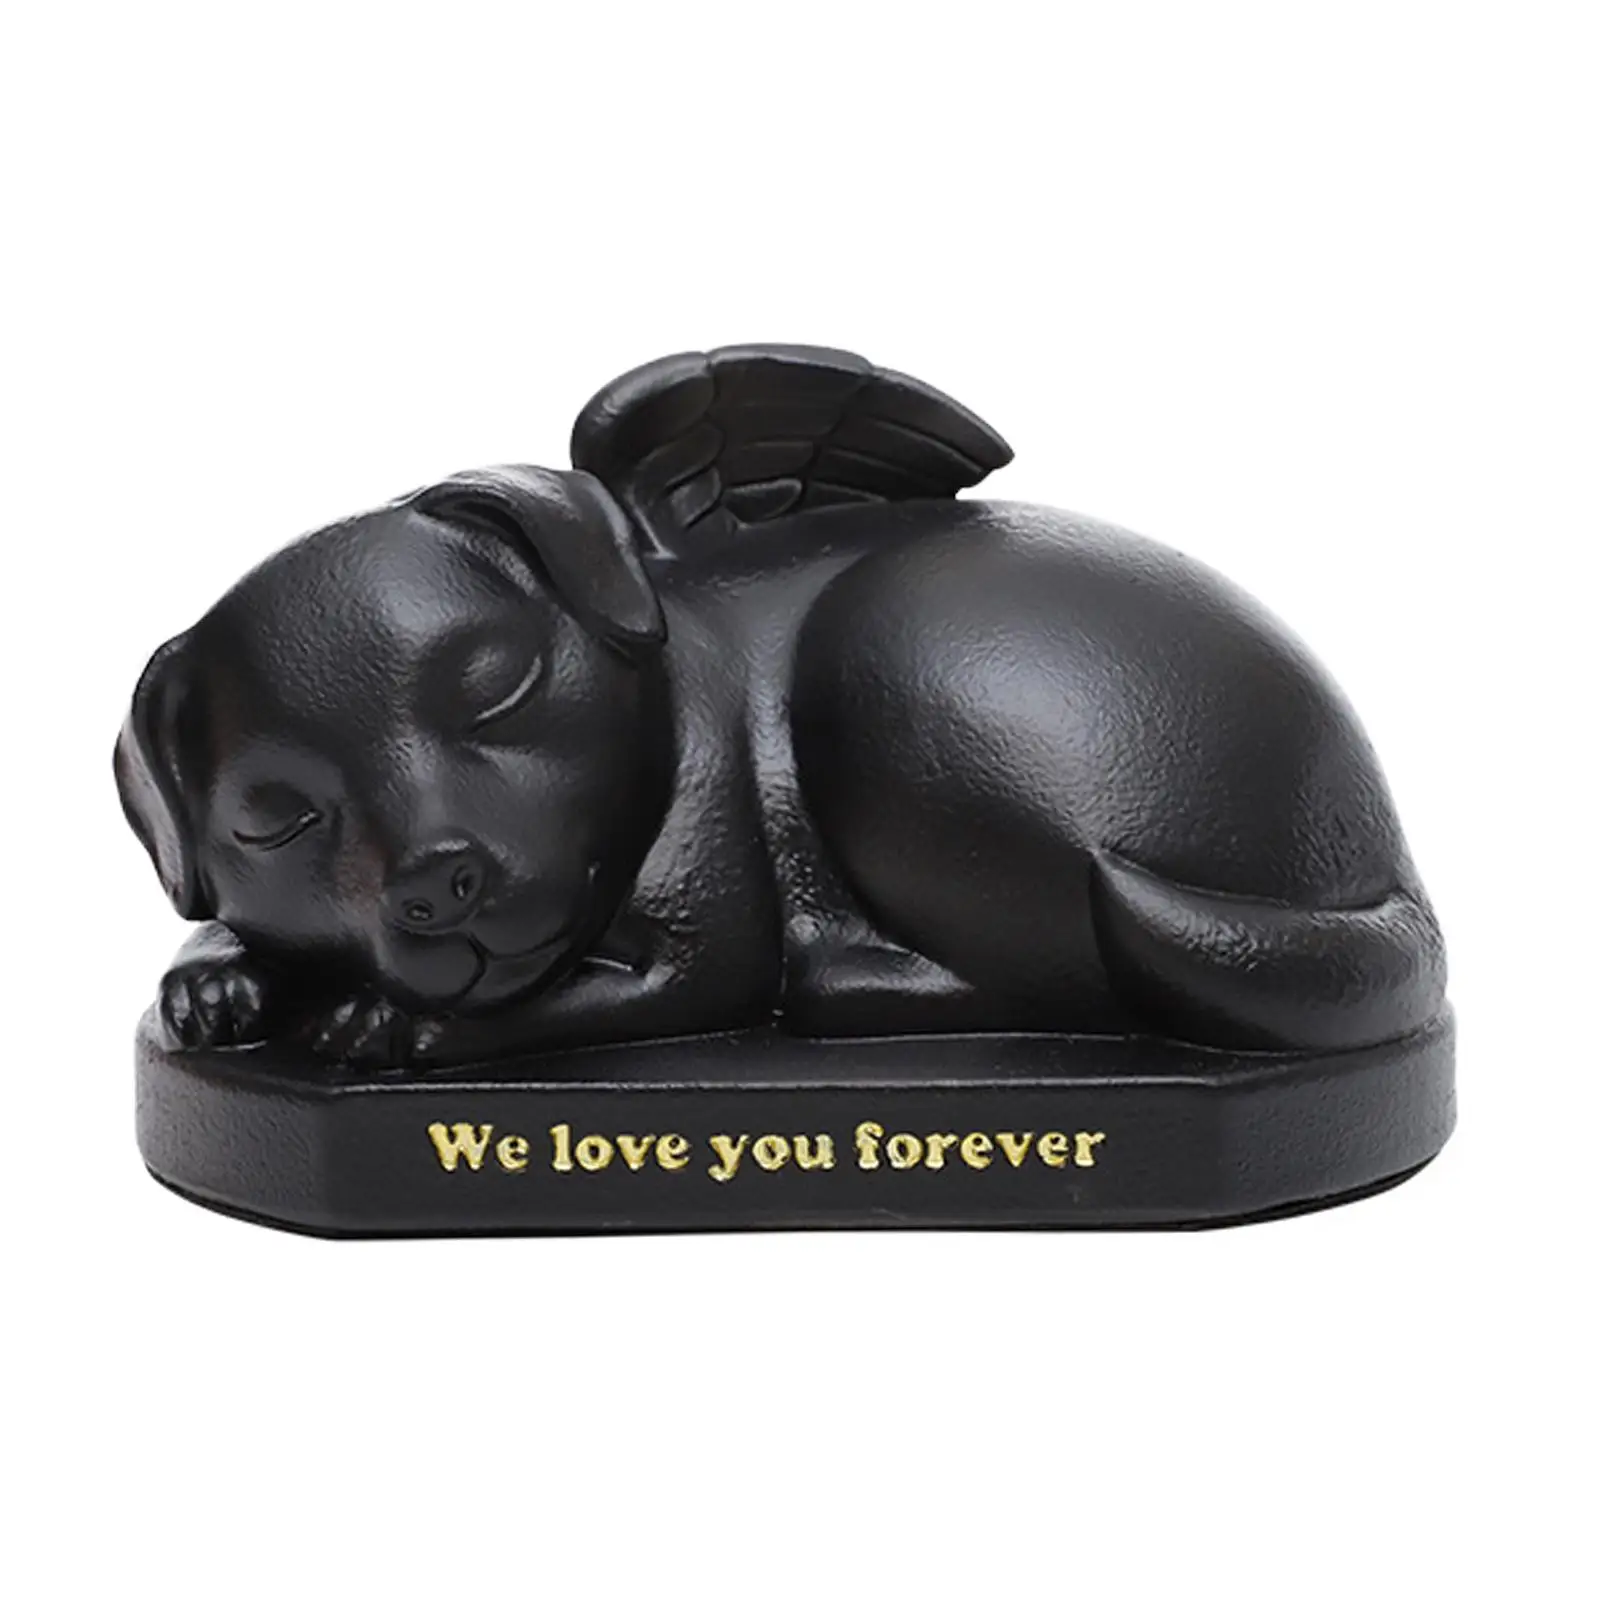 Cremation Urn Final Comforting Resting Place Pet Supplies Sympathy Pet Urns